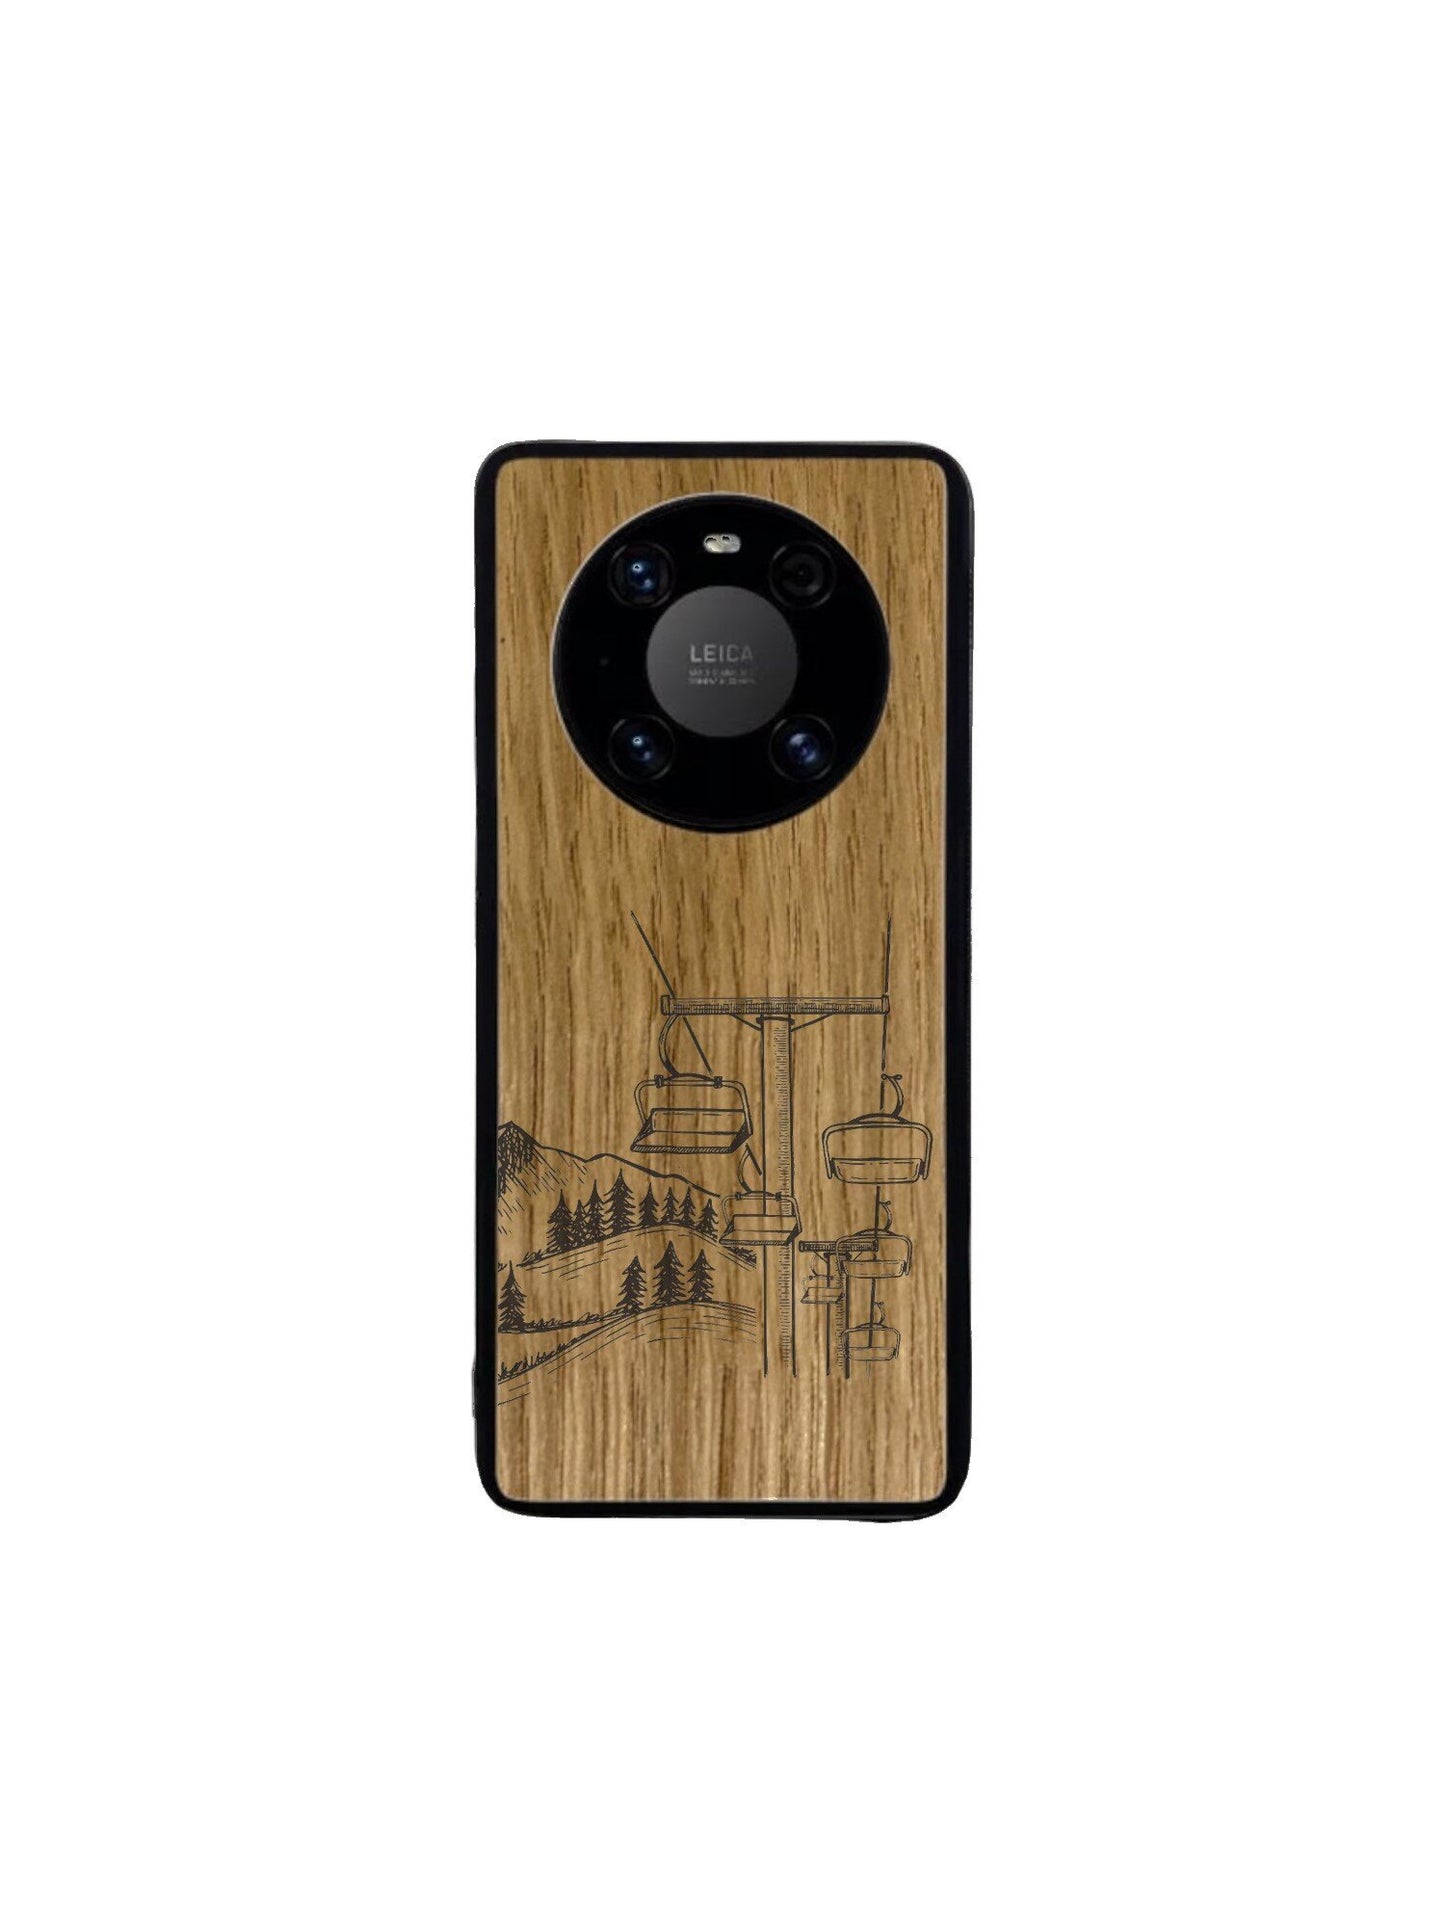 Huawei Mate Case - Chairlift